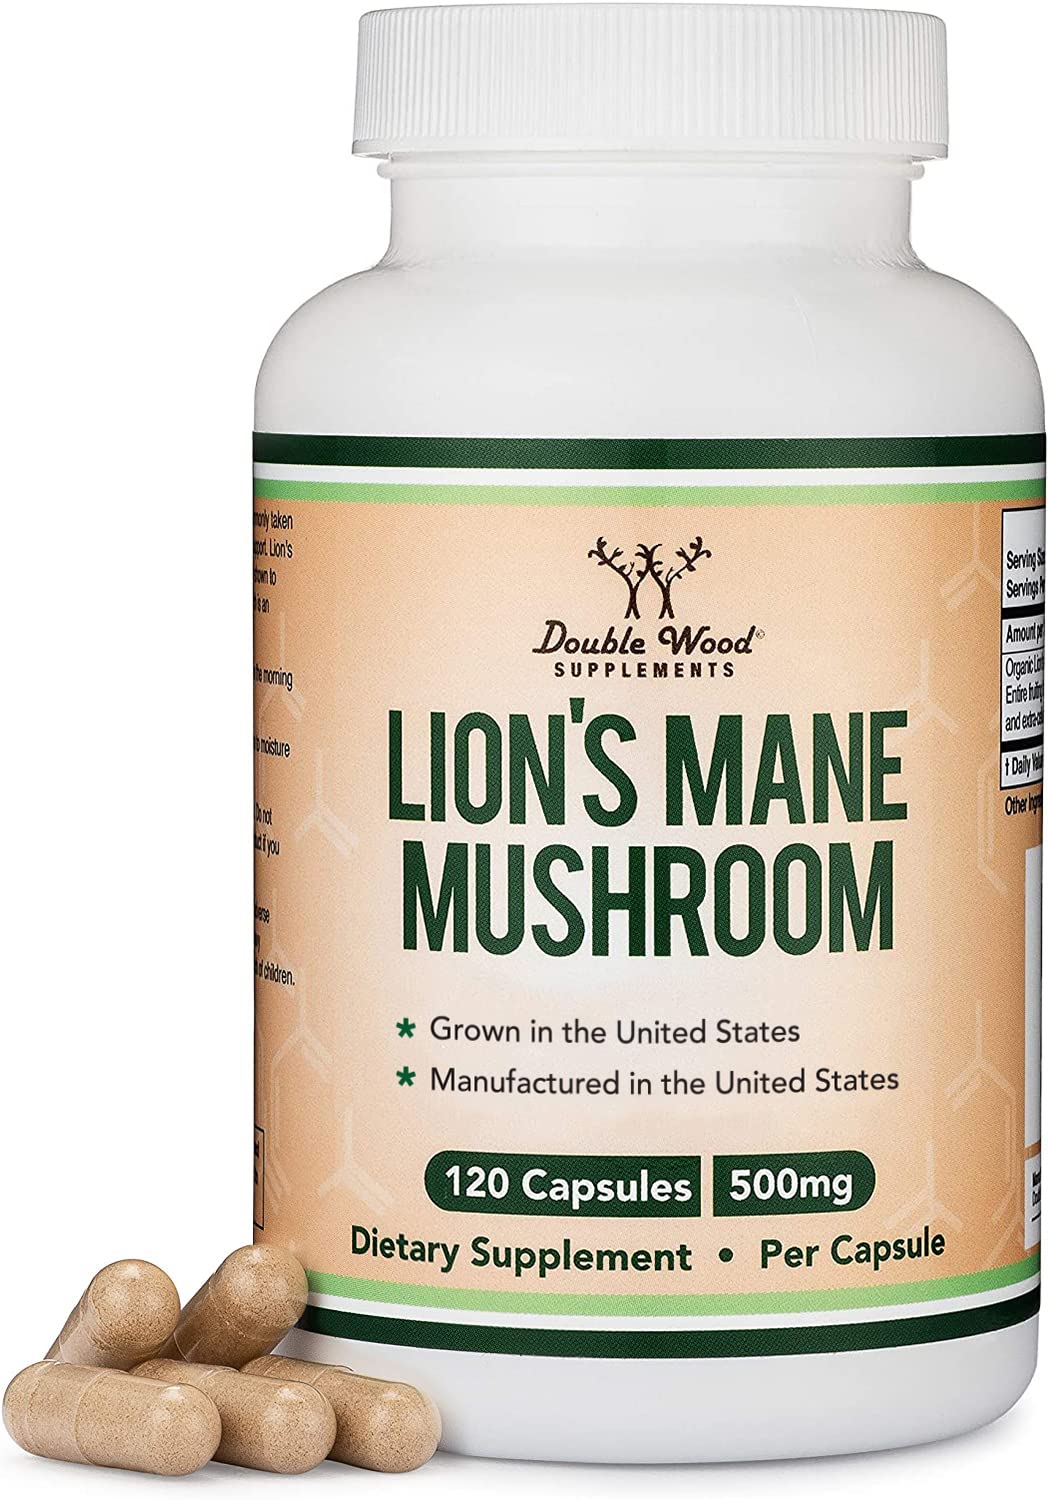 Book Cover Lions Mane Supplement Mushroom Capsules (Two Month Supply - 120 Count) Lions Mane Mushroom for Brain Support and Immune Health (Third Party Tested, Grown and Manufactured in The USA) by Double Wood